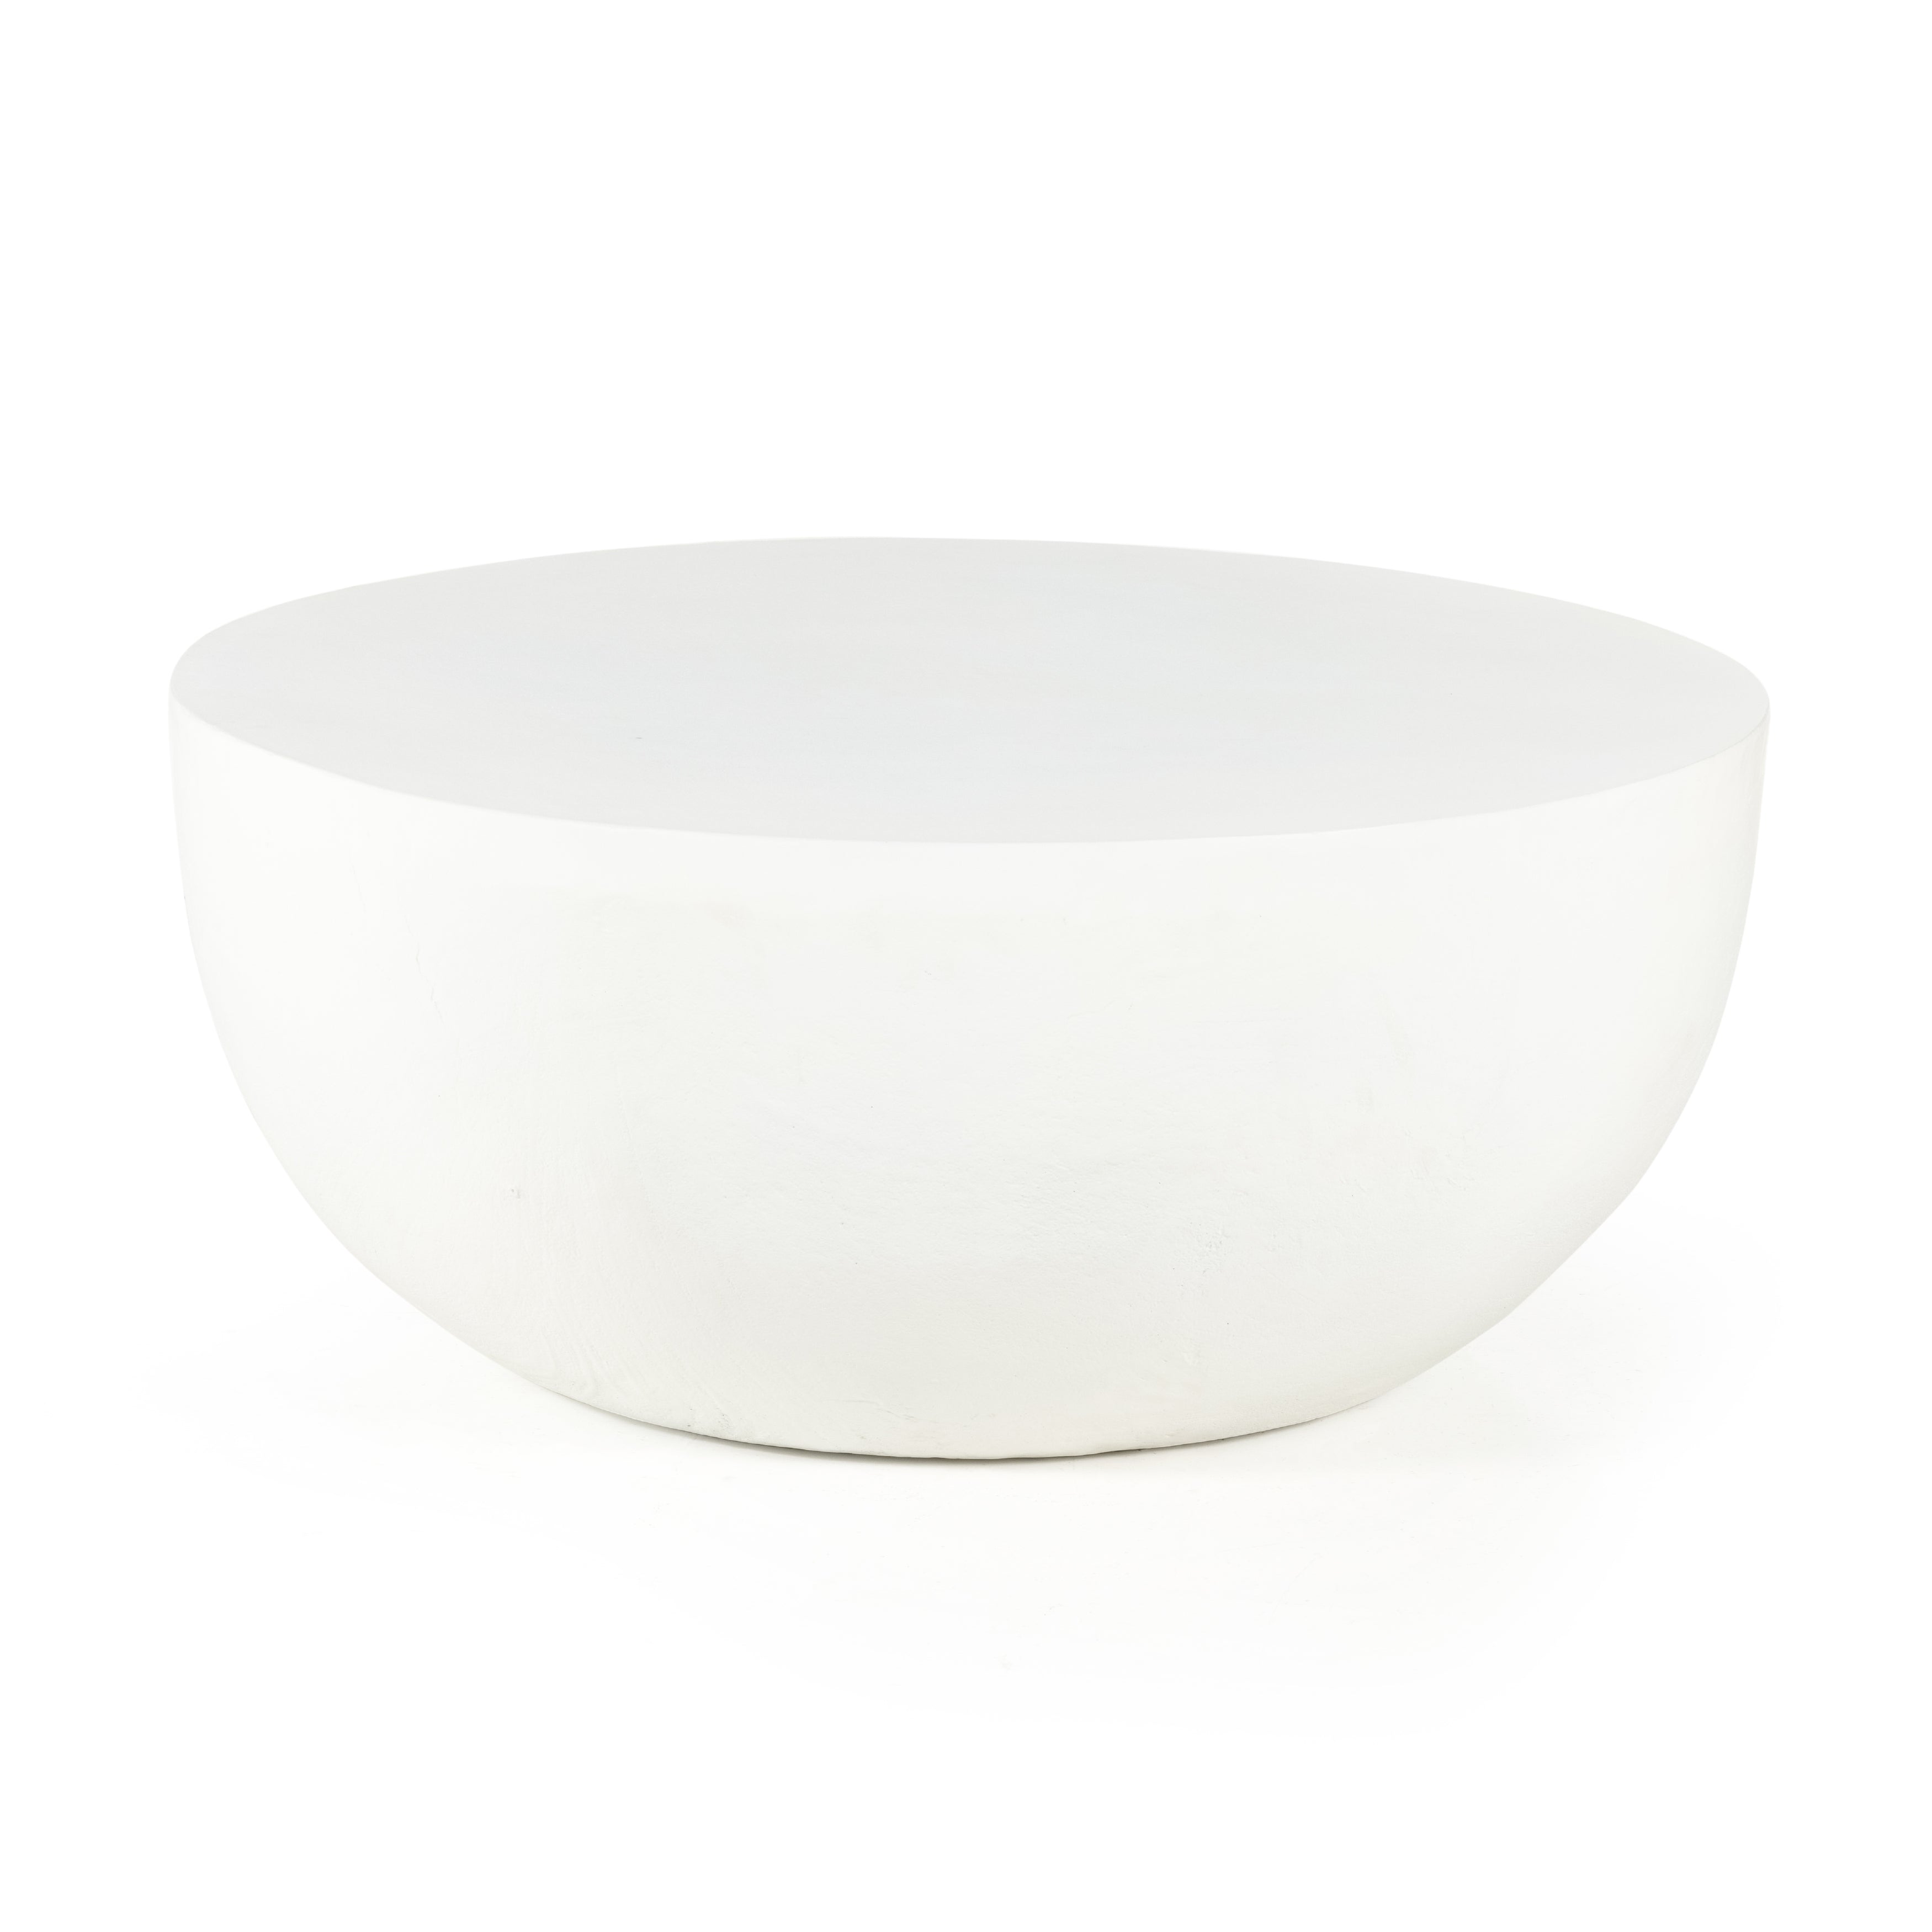 Our favorite Basil Coffee Table now comes in a gorgeous matte white finish. This brings a sleek, simple look to indoor or outdoor spaces.   Cover or store indoors during inclement weather and when not in use.  Overall Dimensions: 36.00"w x 36.00"d x 15.00"h